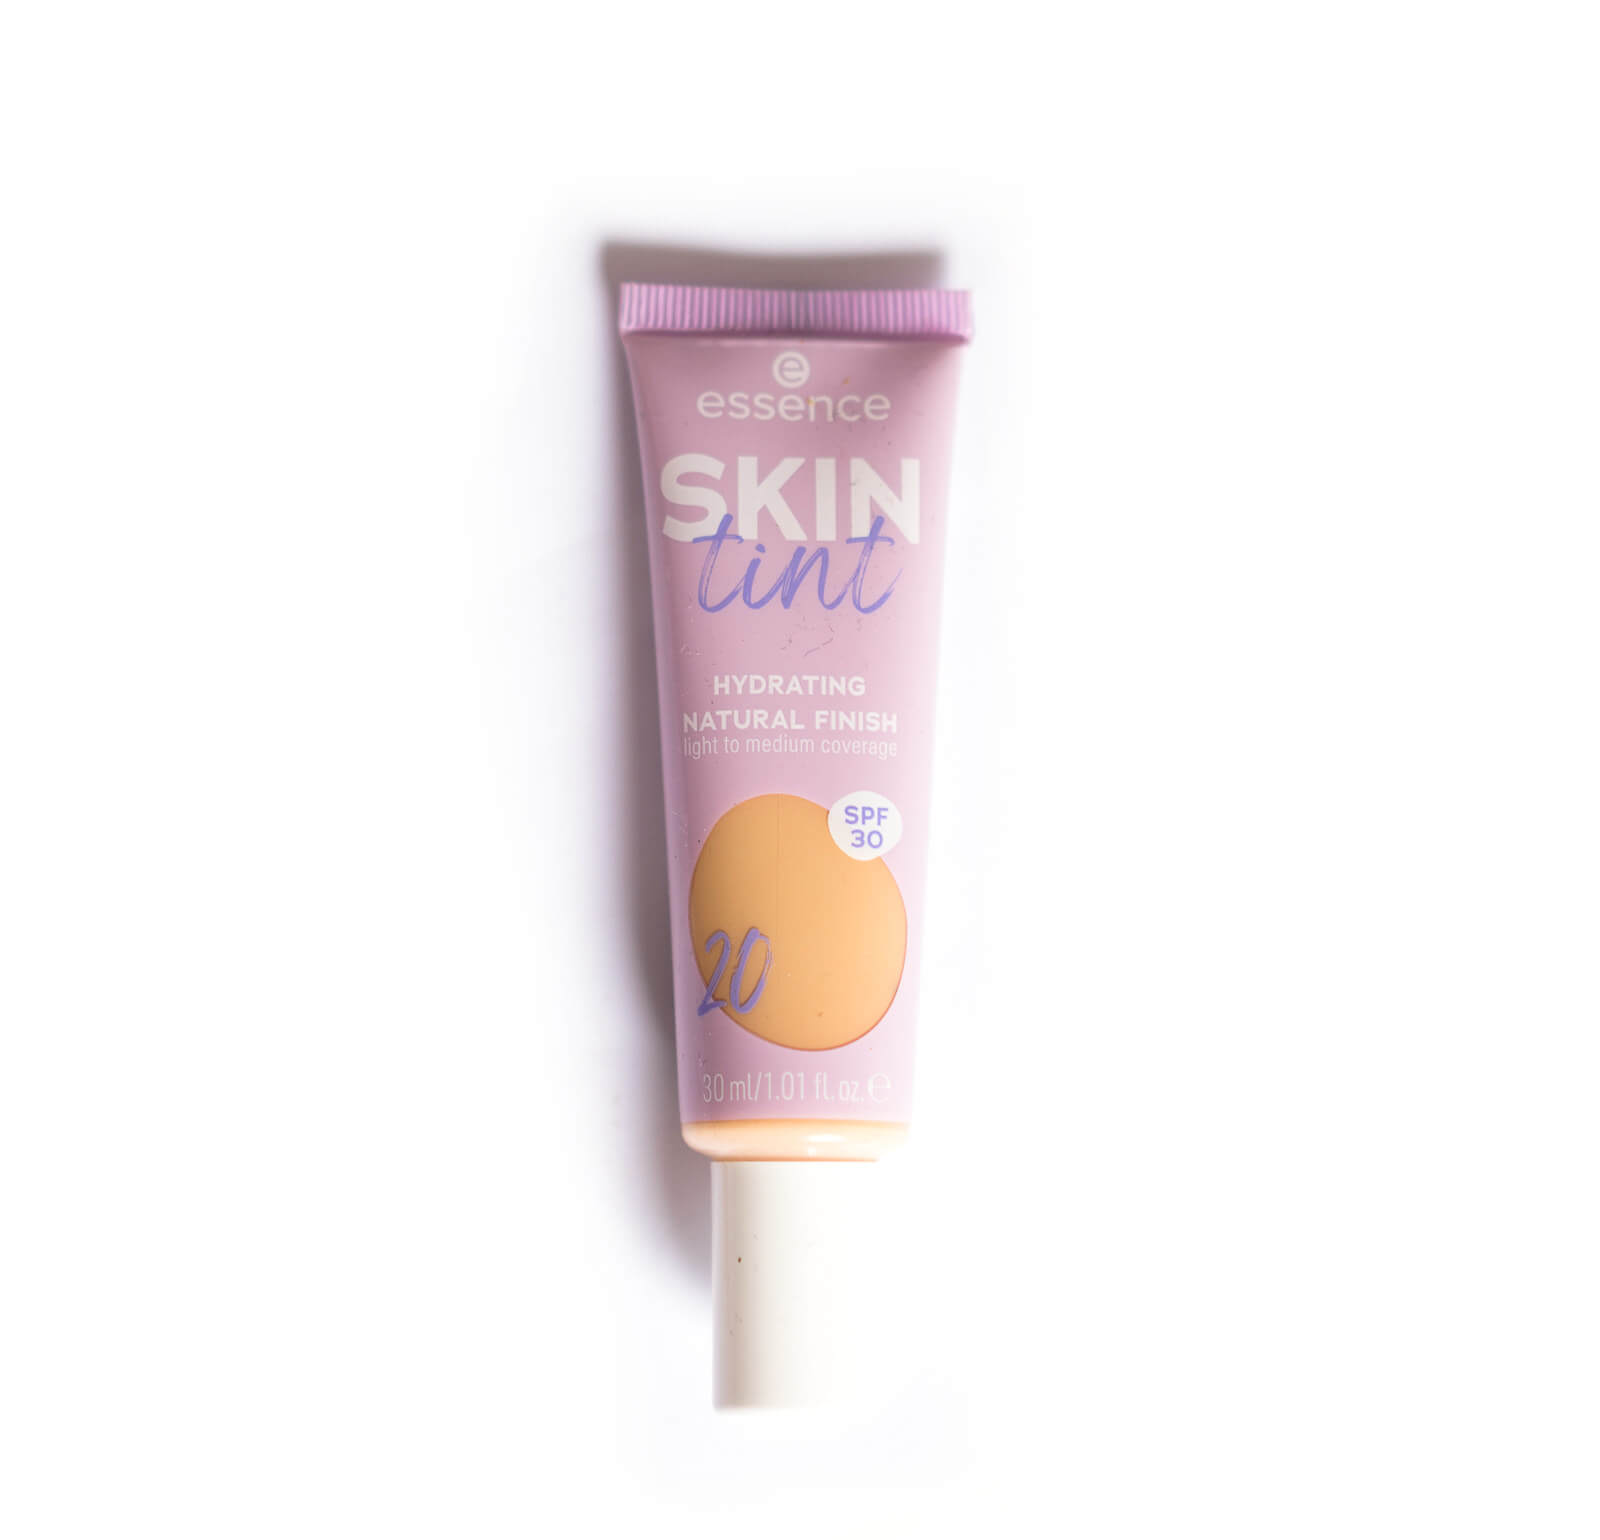 Review - Essence Foundation - Skin Tint Hydrating Natural Finish LSF 30 im Test 4